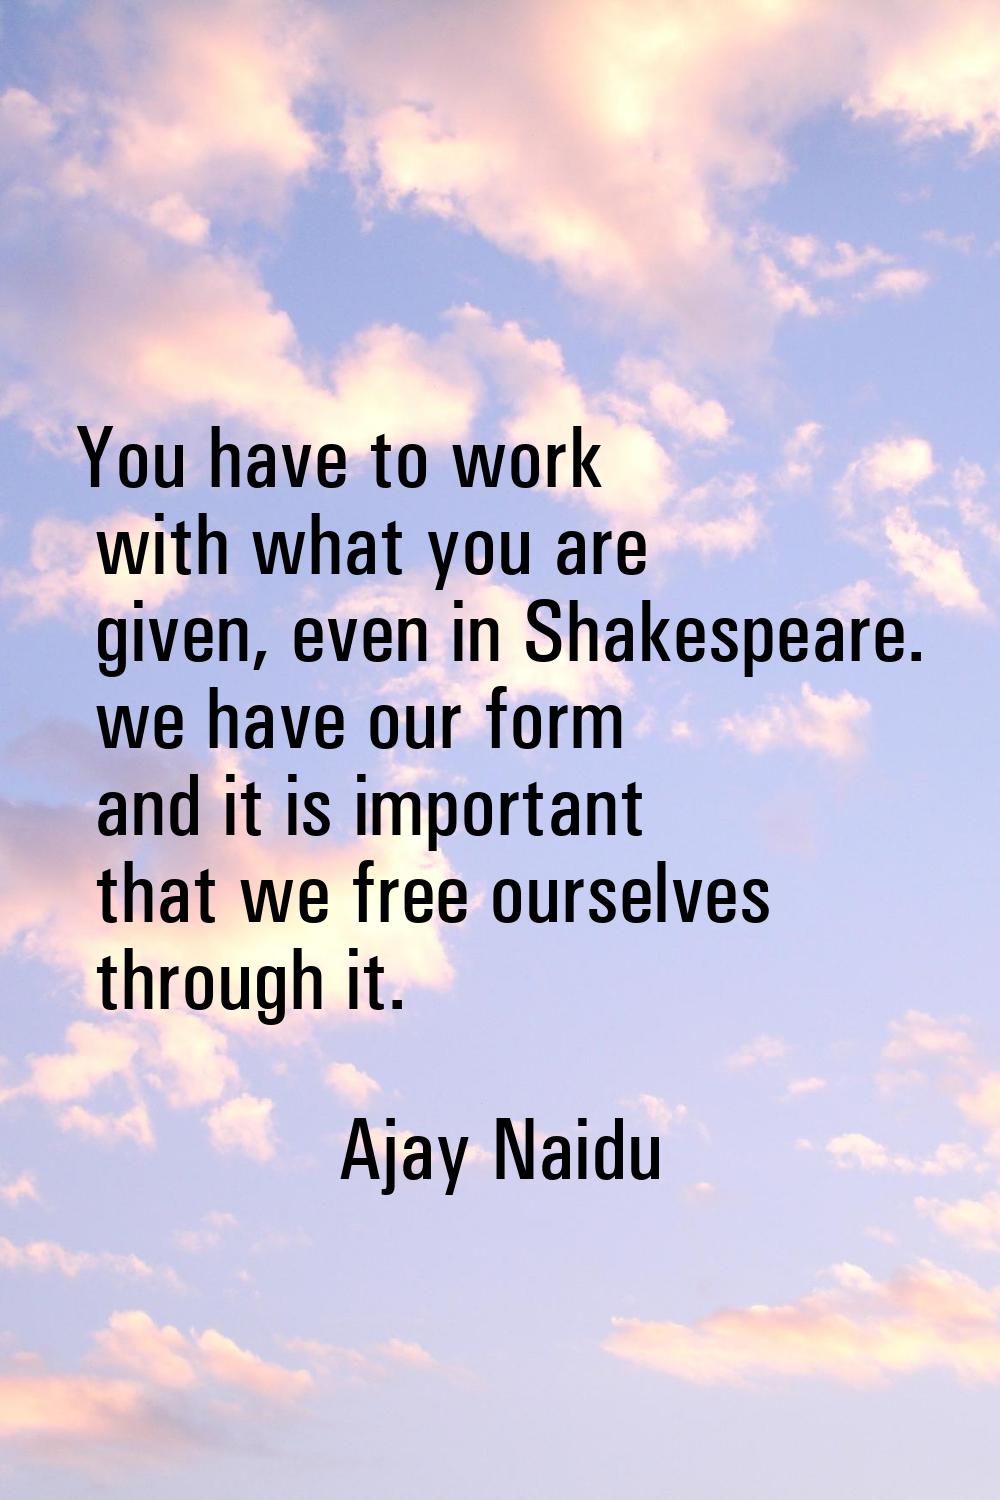 You have to work with what you are given, even in Shakespeare. we have our form and it is important